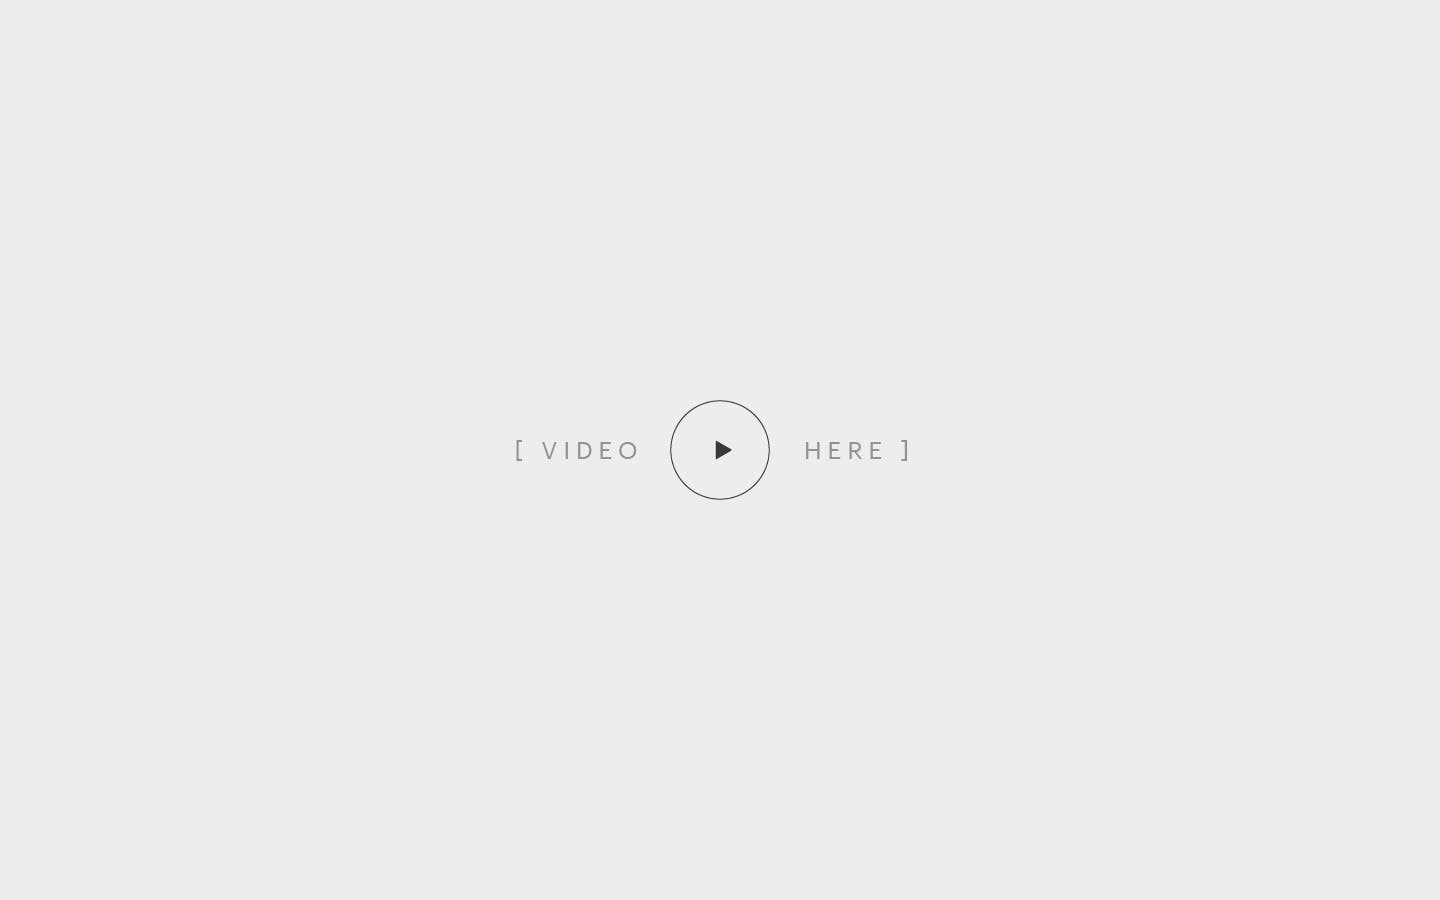 Video Placehold